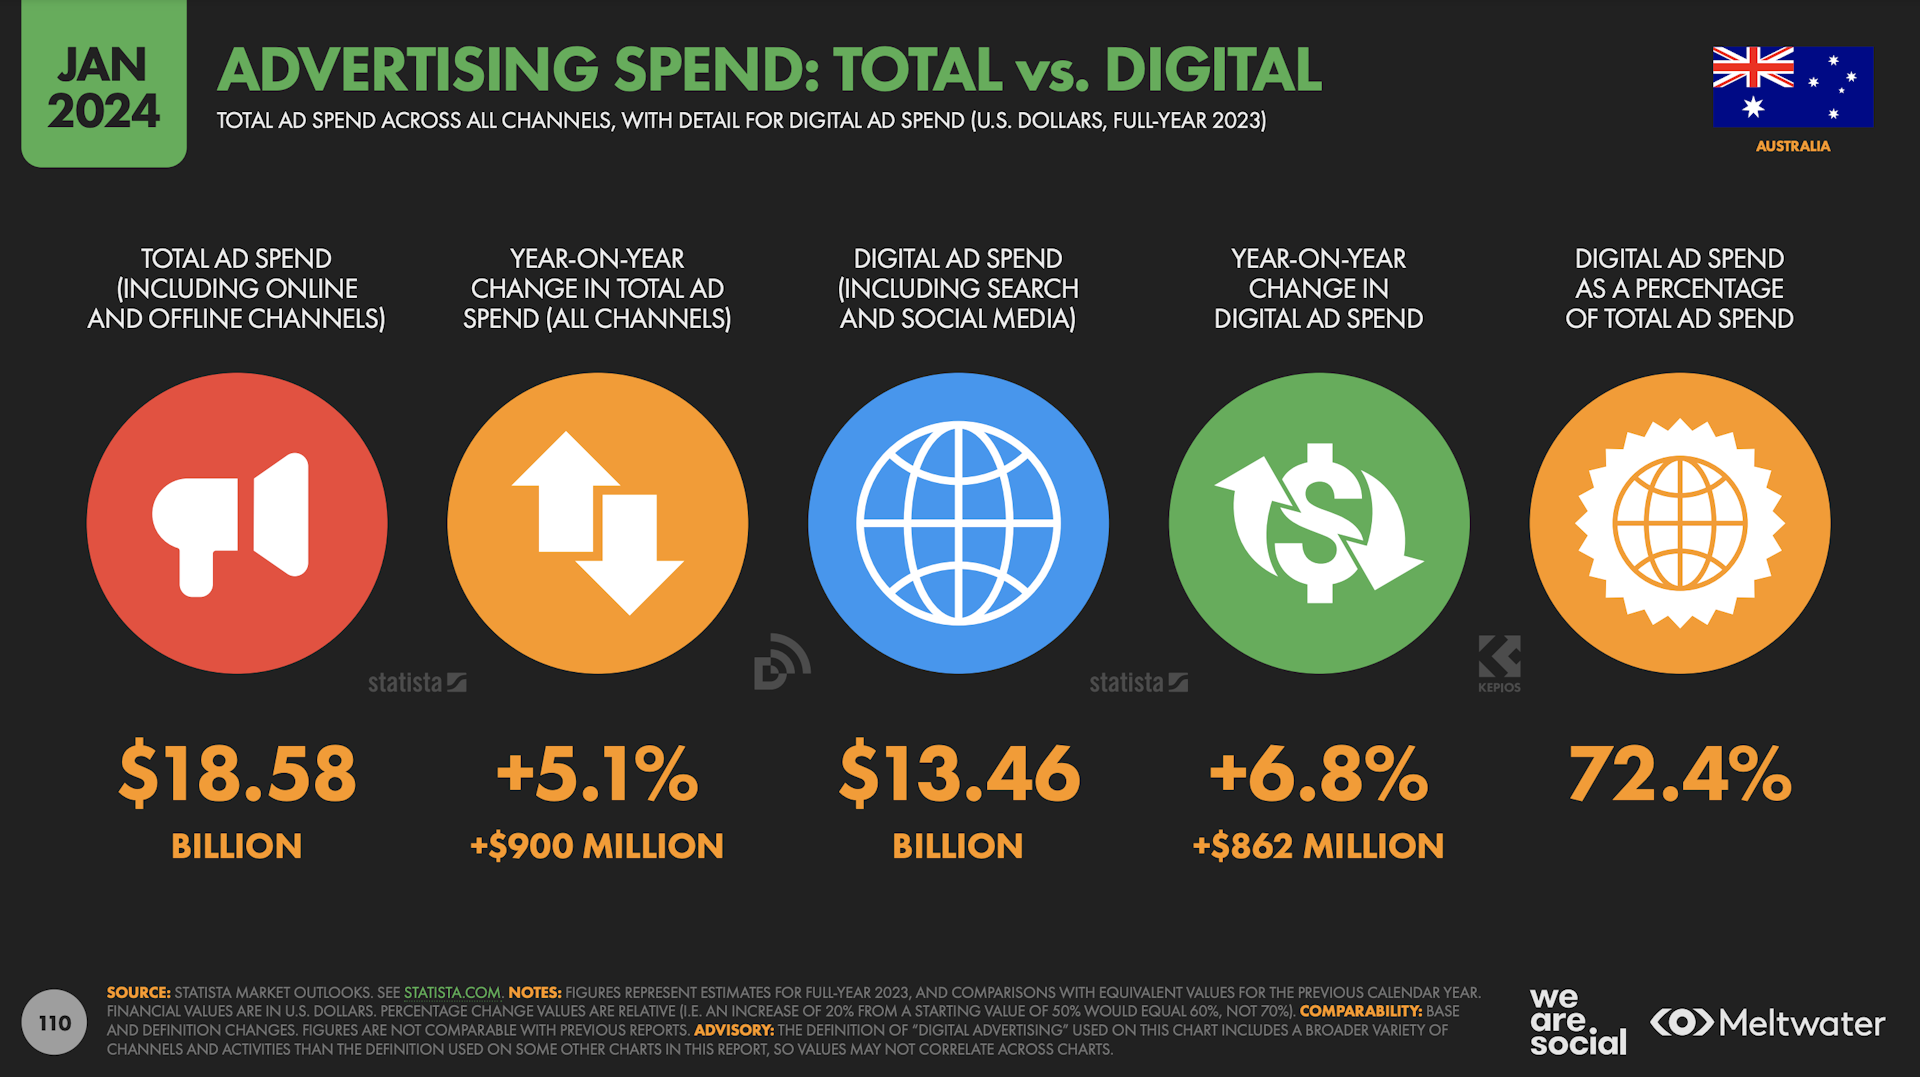 Total ad spend across all channels with breakdown for digital ad spend based on Global Digital Report 2024 for Australia